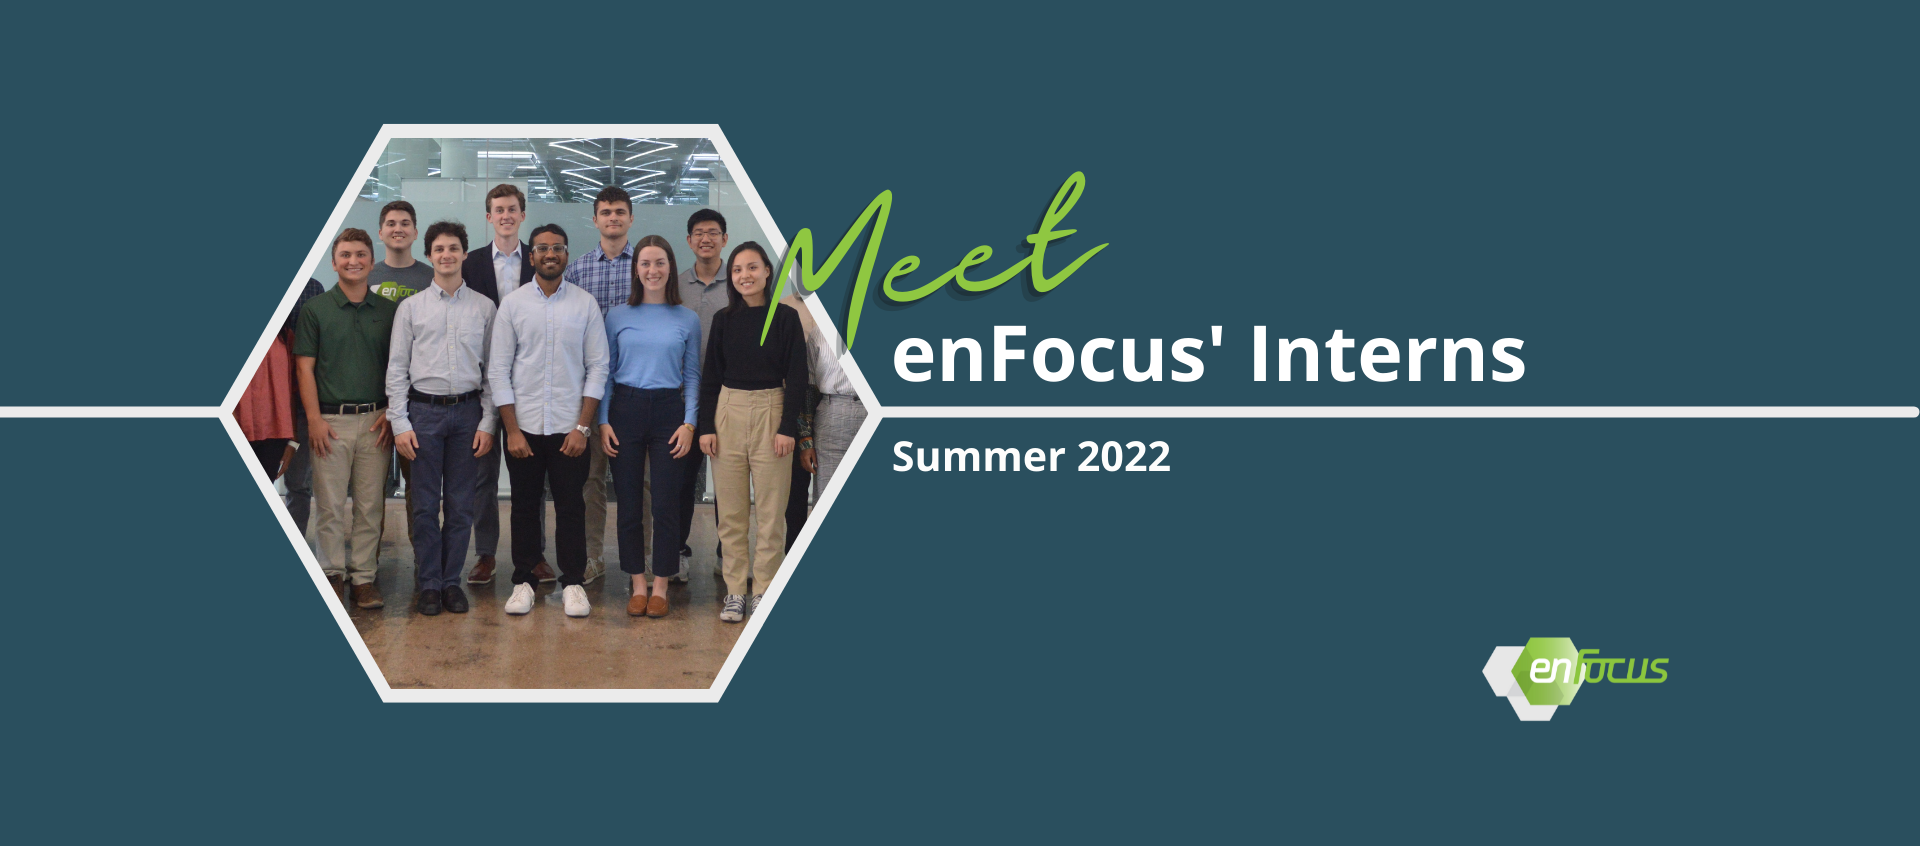 Over 220 Applicants Leads to Impressive Summer Intern Cohort